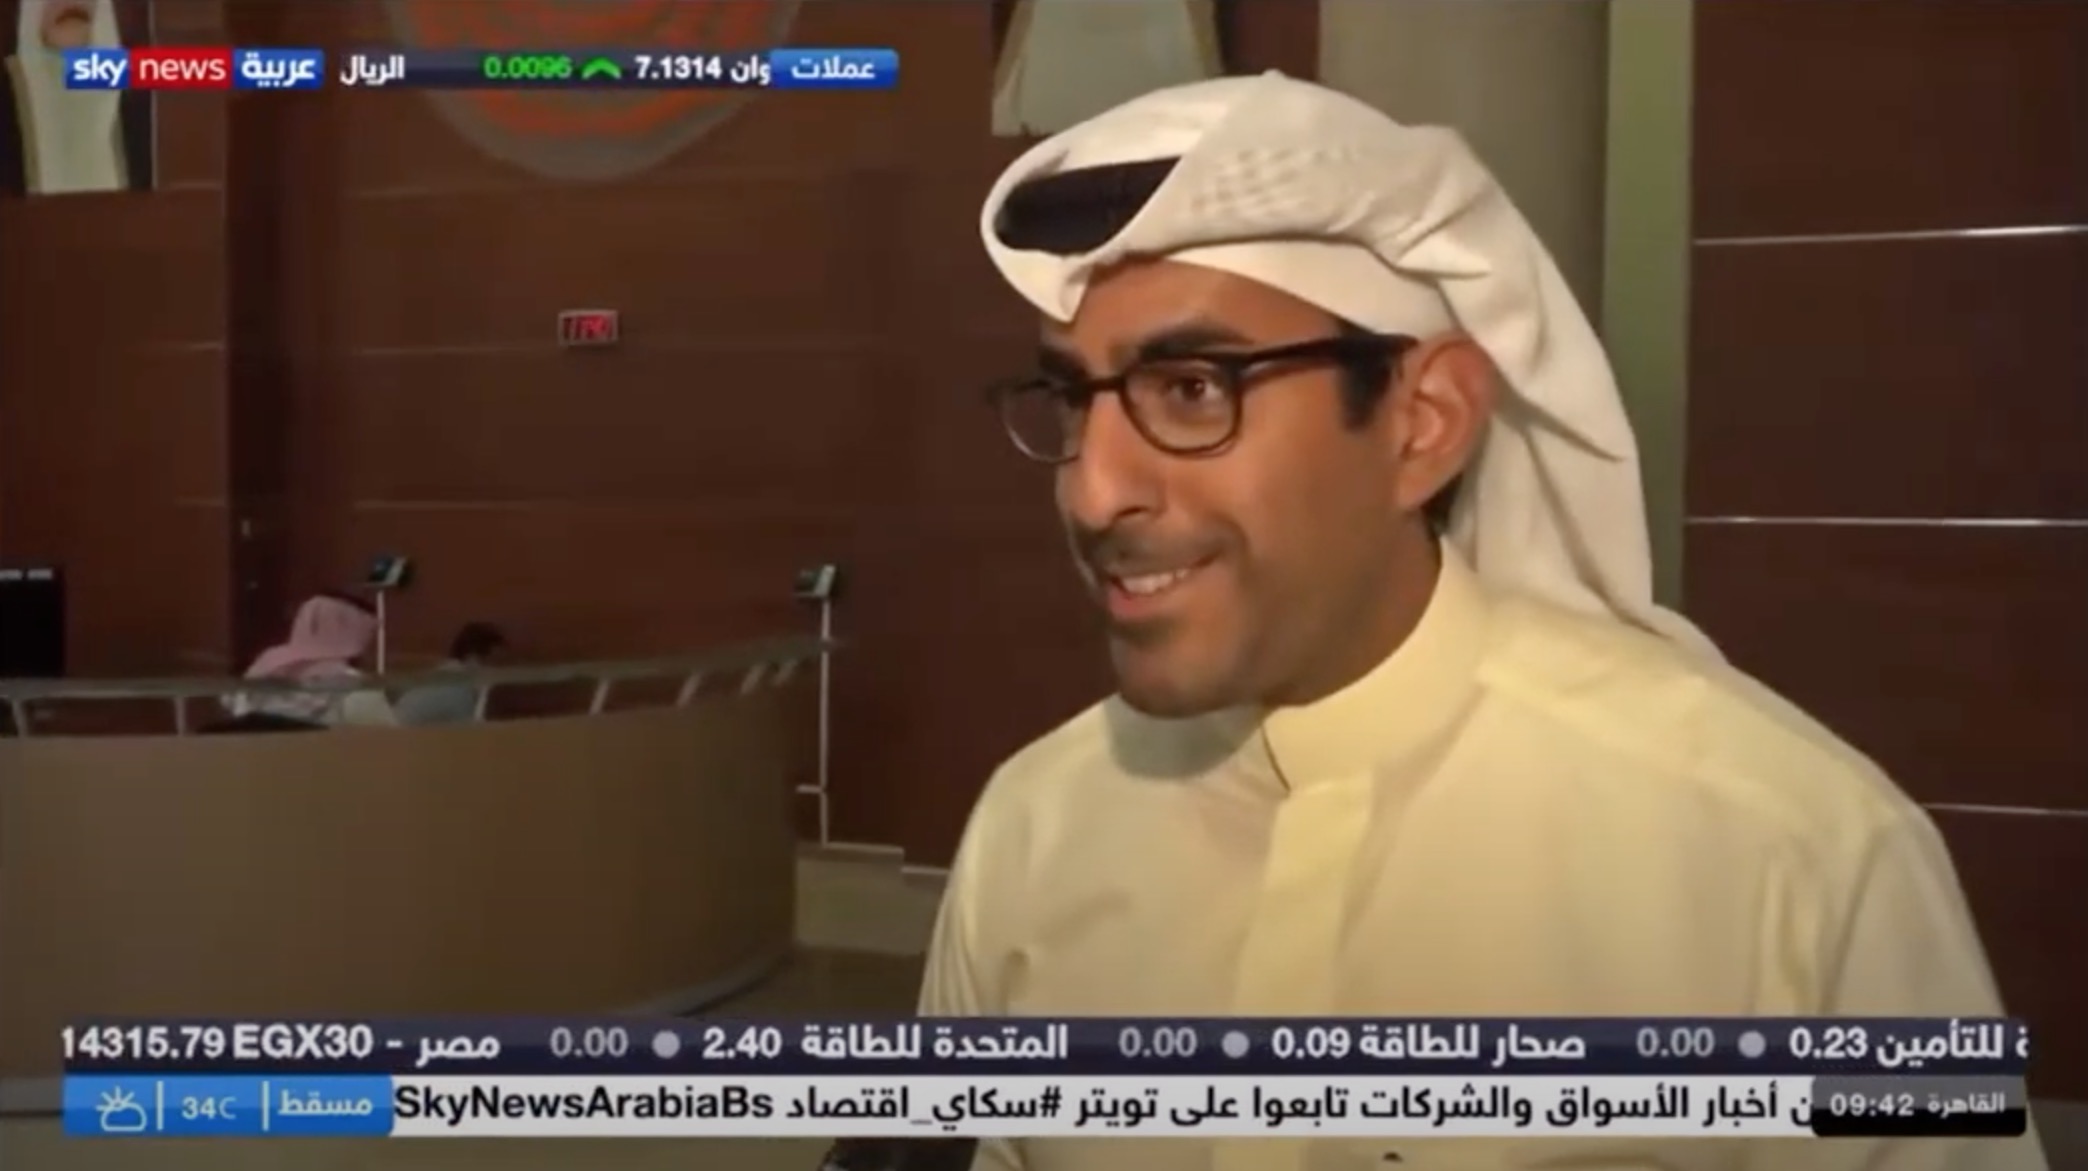 Interview with the CEO of NBK Capital Faisal Al-Hamad on Sky News - Arabia about the IPO in North Al-Zour